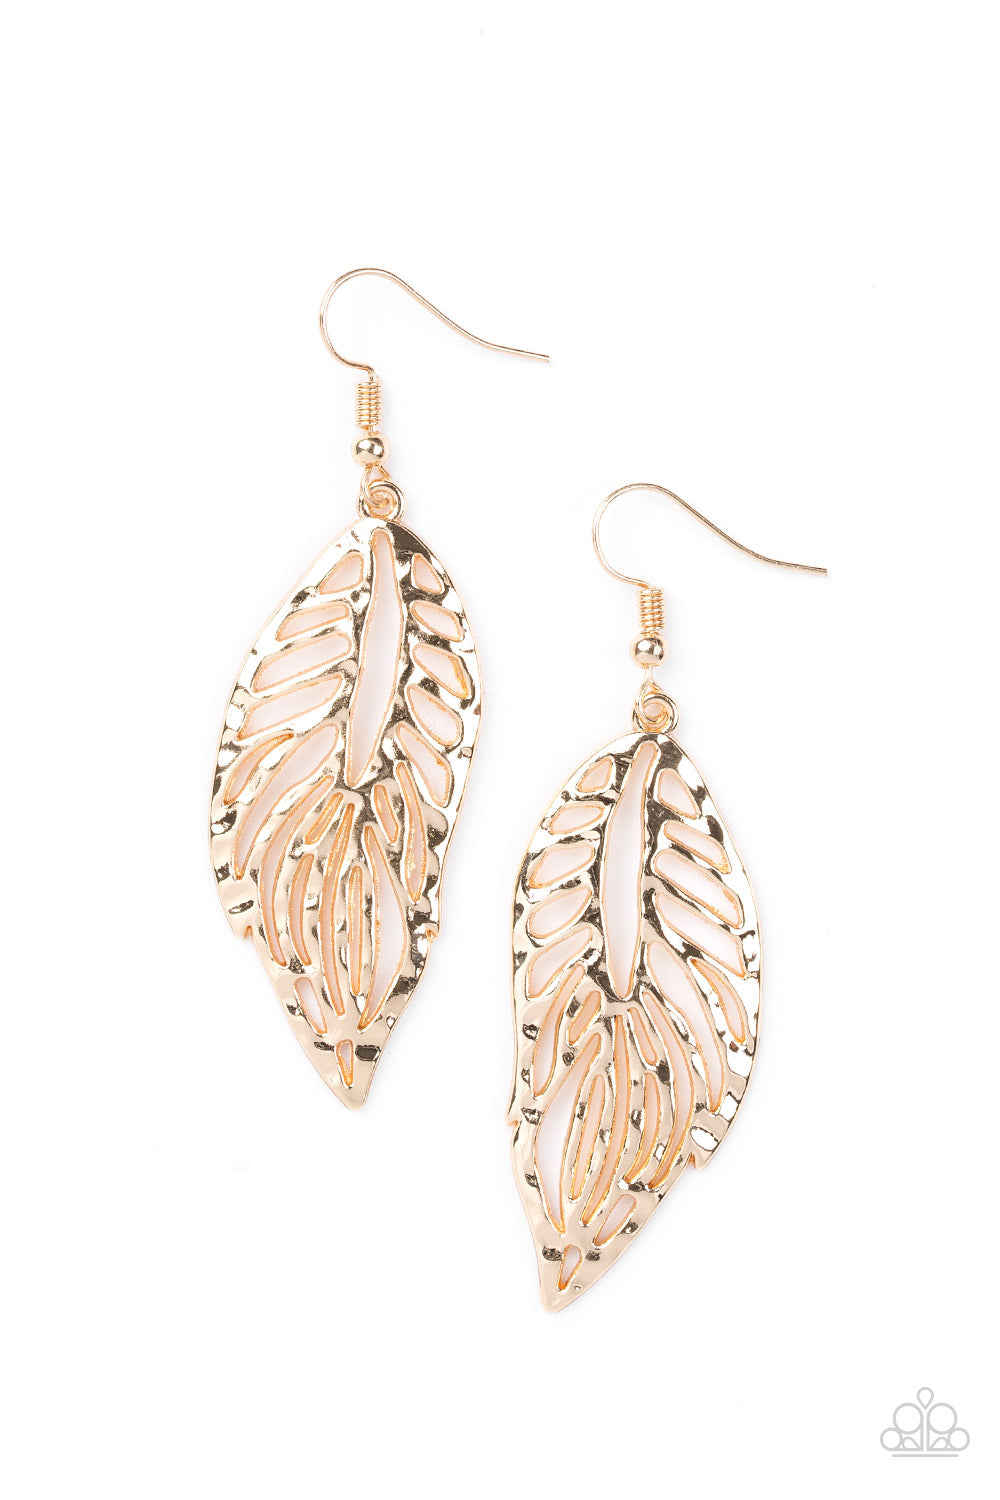 Come Home To Roost Gold Paparazzi Earrings Cashmere Pink Jewels - Cashmere Pink Jewels & Accessories, Cashmere Pink Jewels & Accessories - Paparazzi